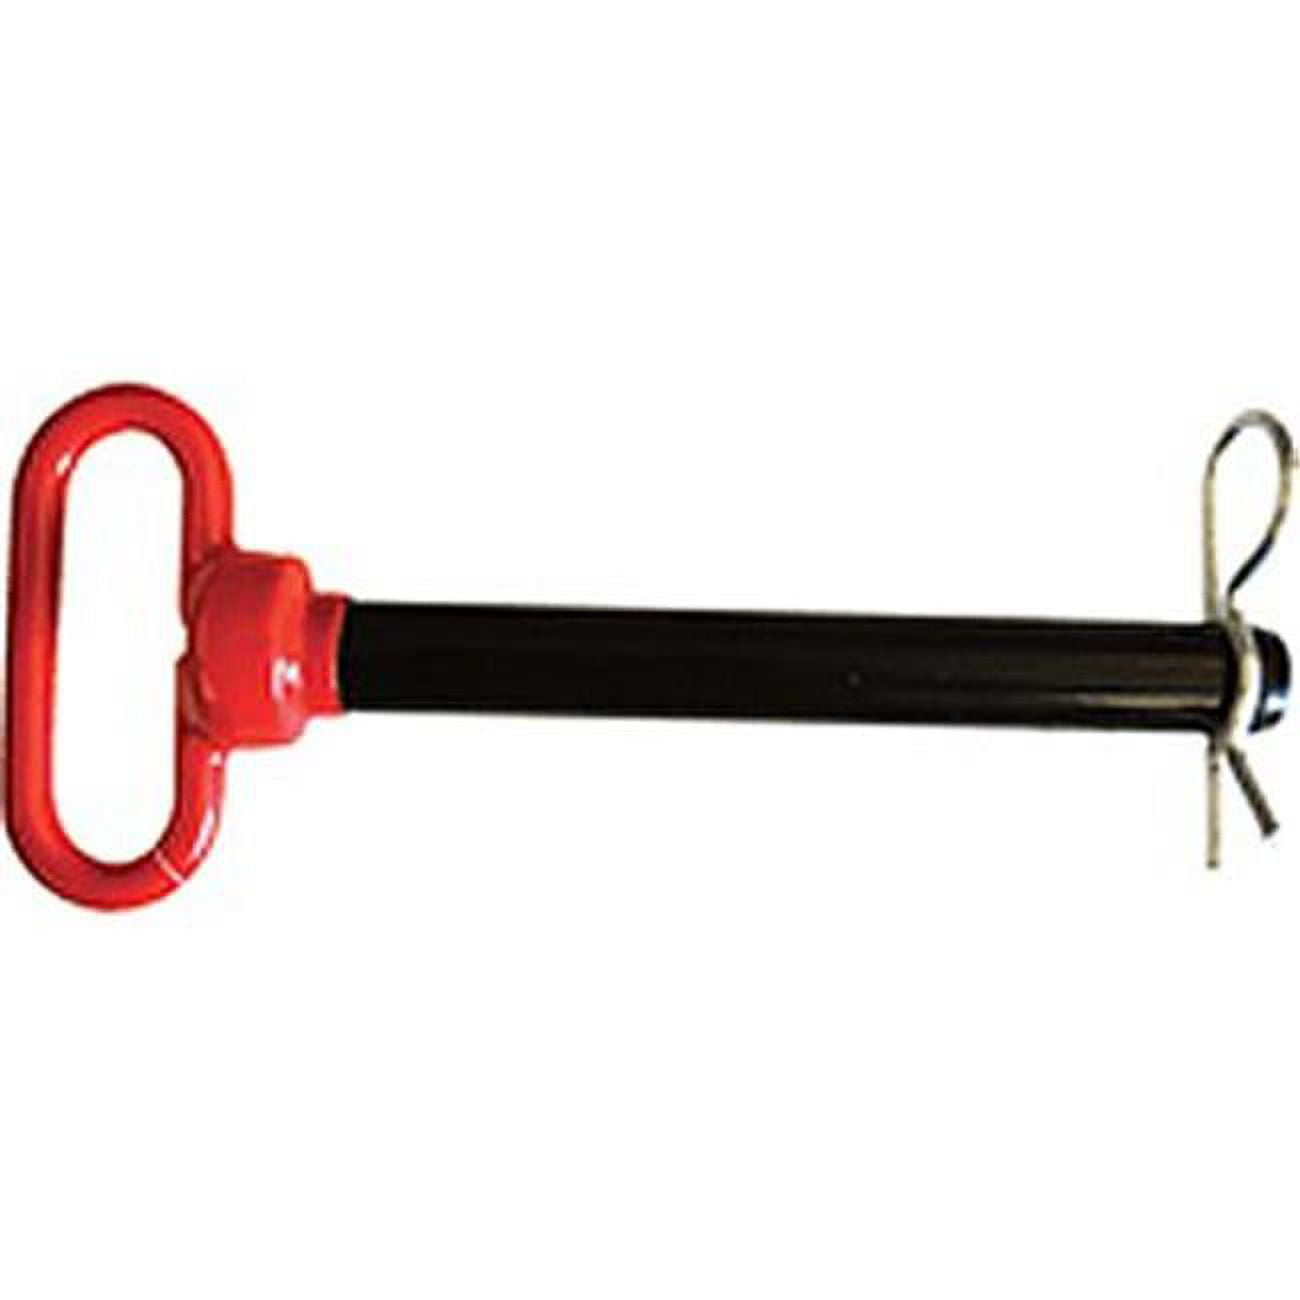 T3898934 0.75 X 4.5 In. Campbell Red Head Hitch Pin